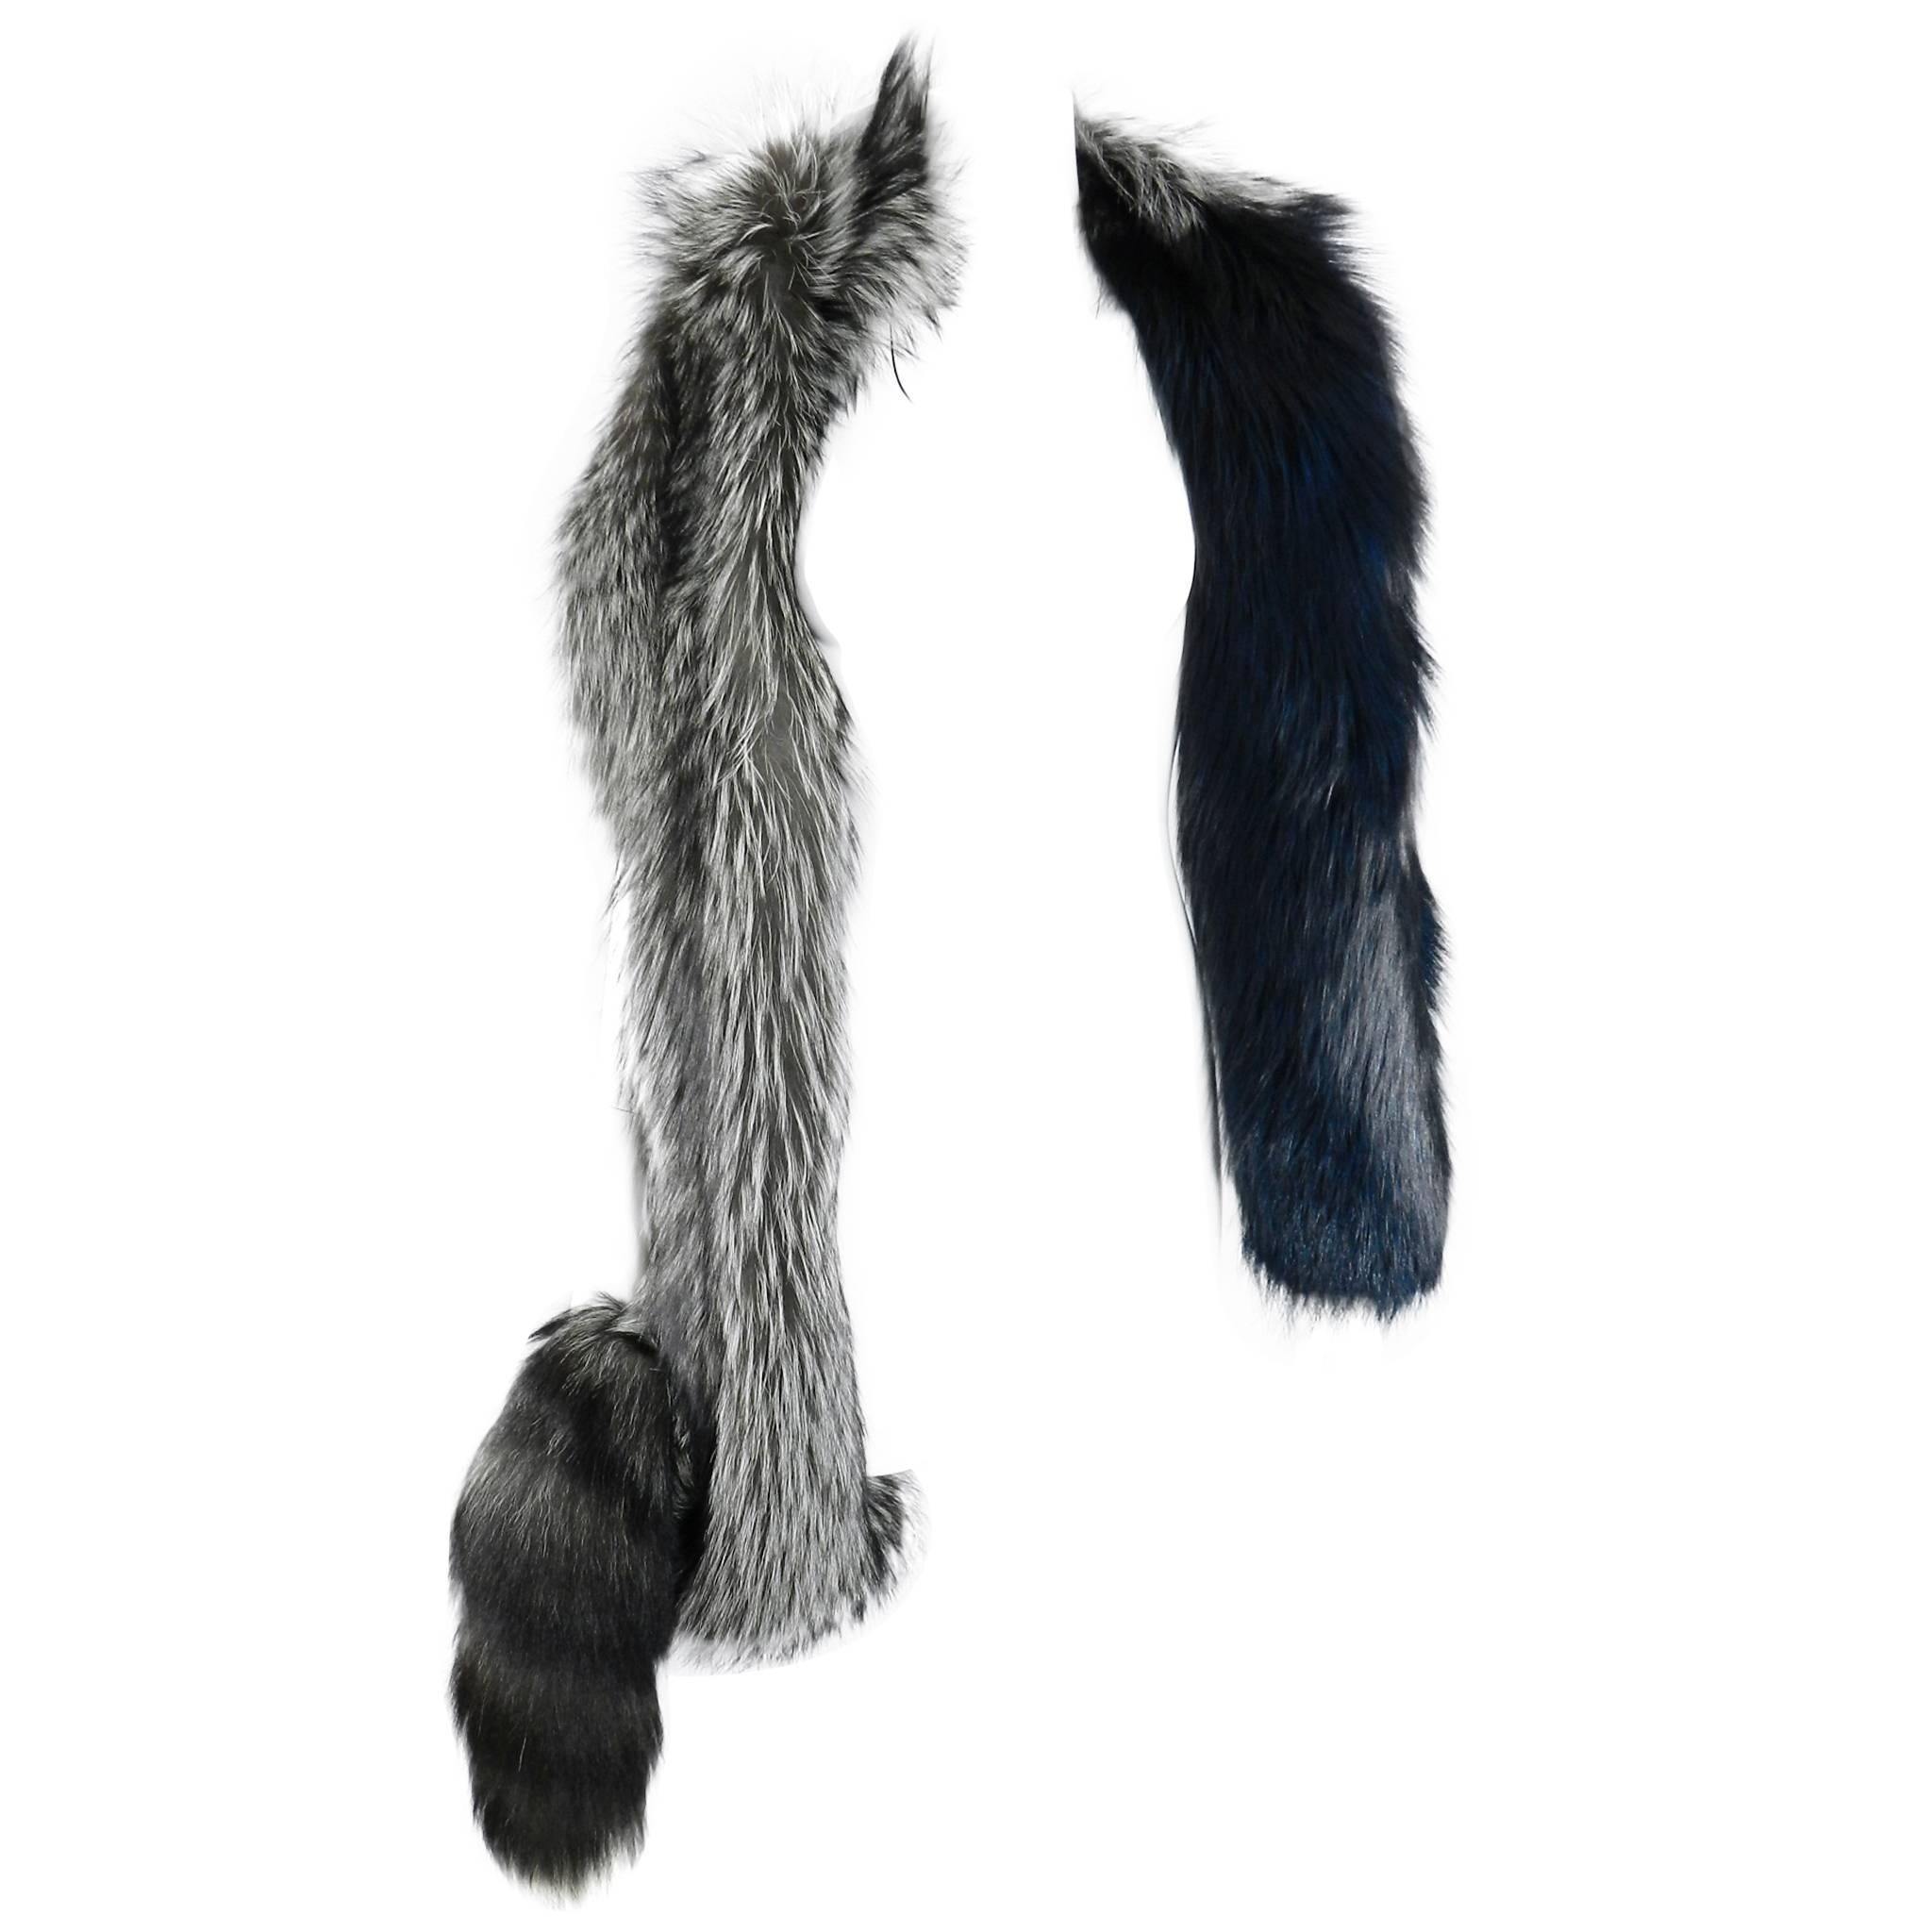 Lanvin fall 2010 Silver fox fur scarf / stole with 1 sleeve